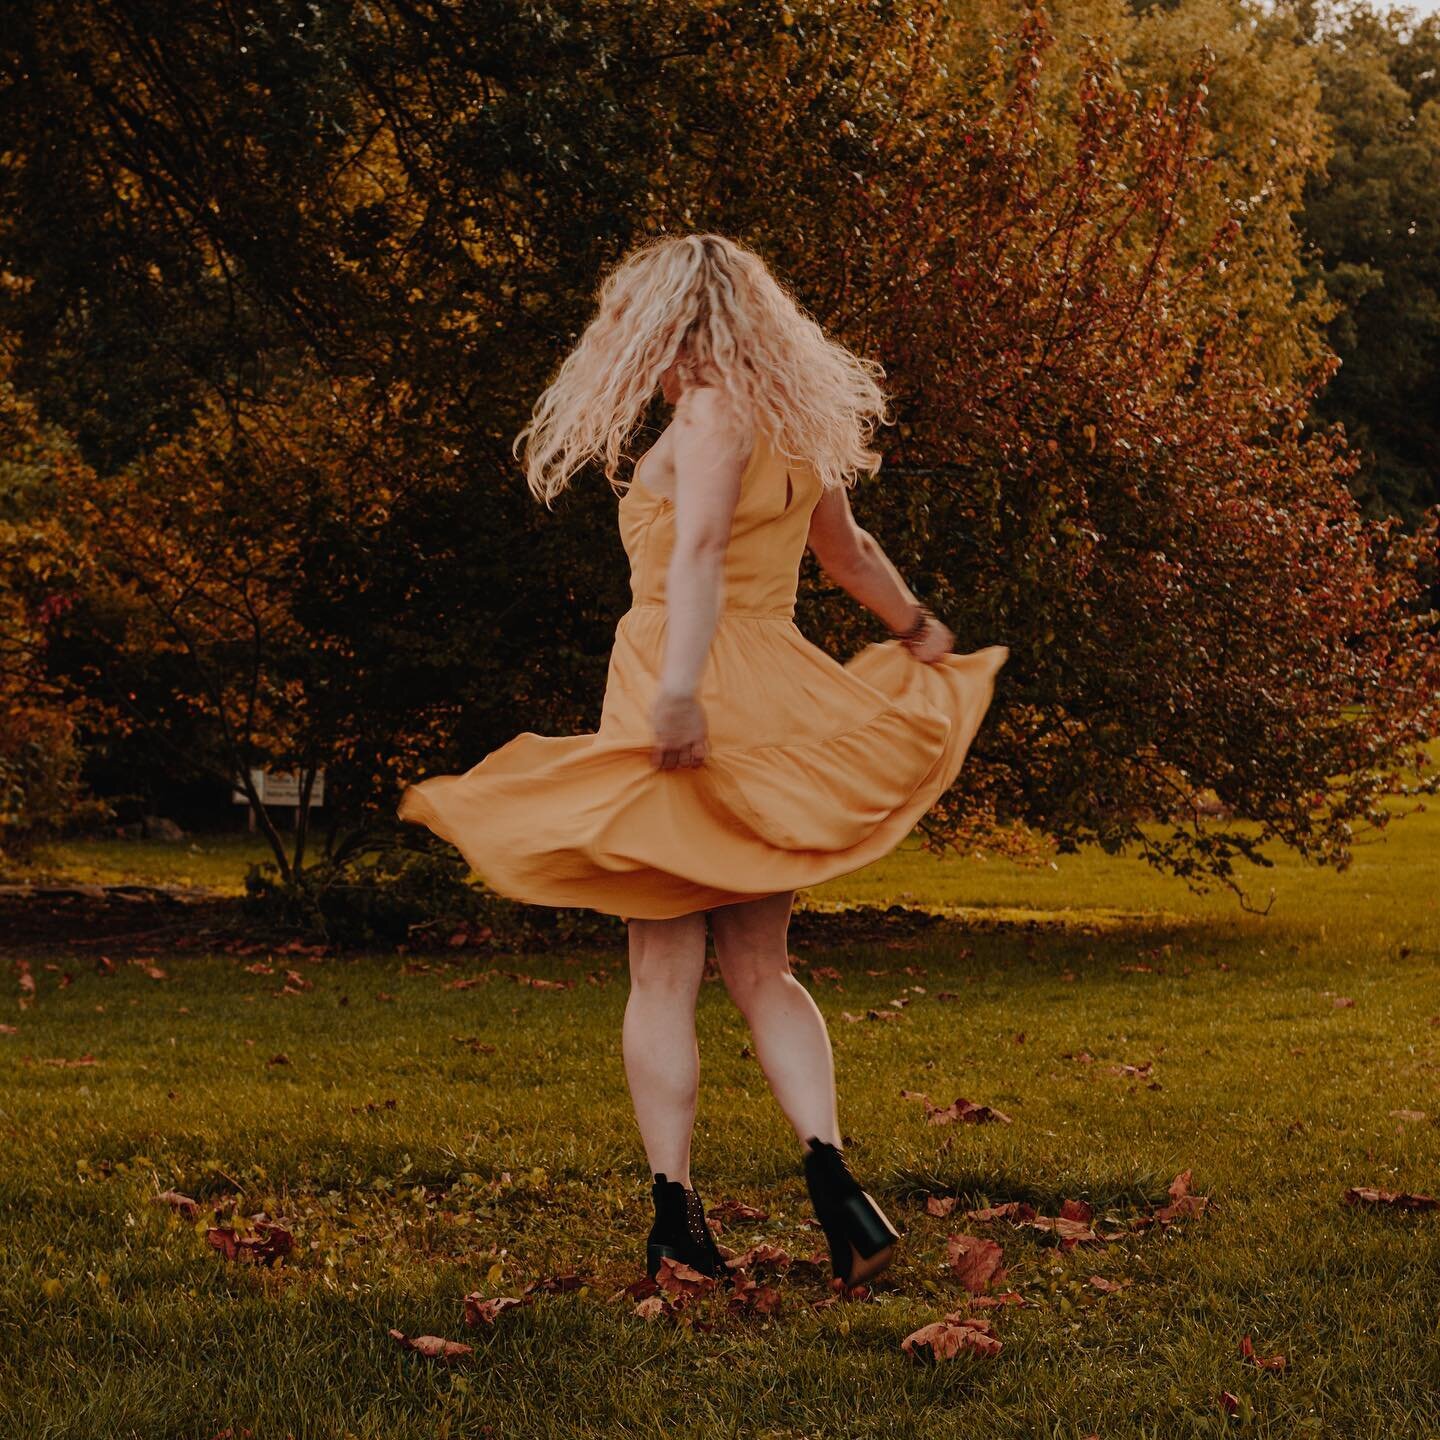 🌻Dancing to the fact that Feels Like Honey was released a week ago! Thank you so much for listening. And most importantly, thank you for such a wonderful week of support🌻✨💛
&bull;
&bull;
&bull;
&bull;

#feelslikehoney #newmusic #newmusicproject #i